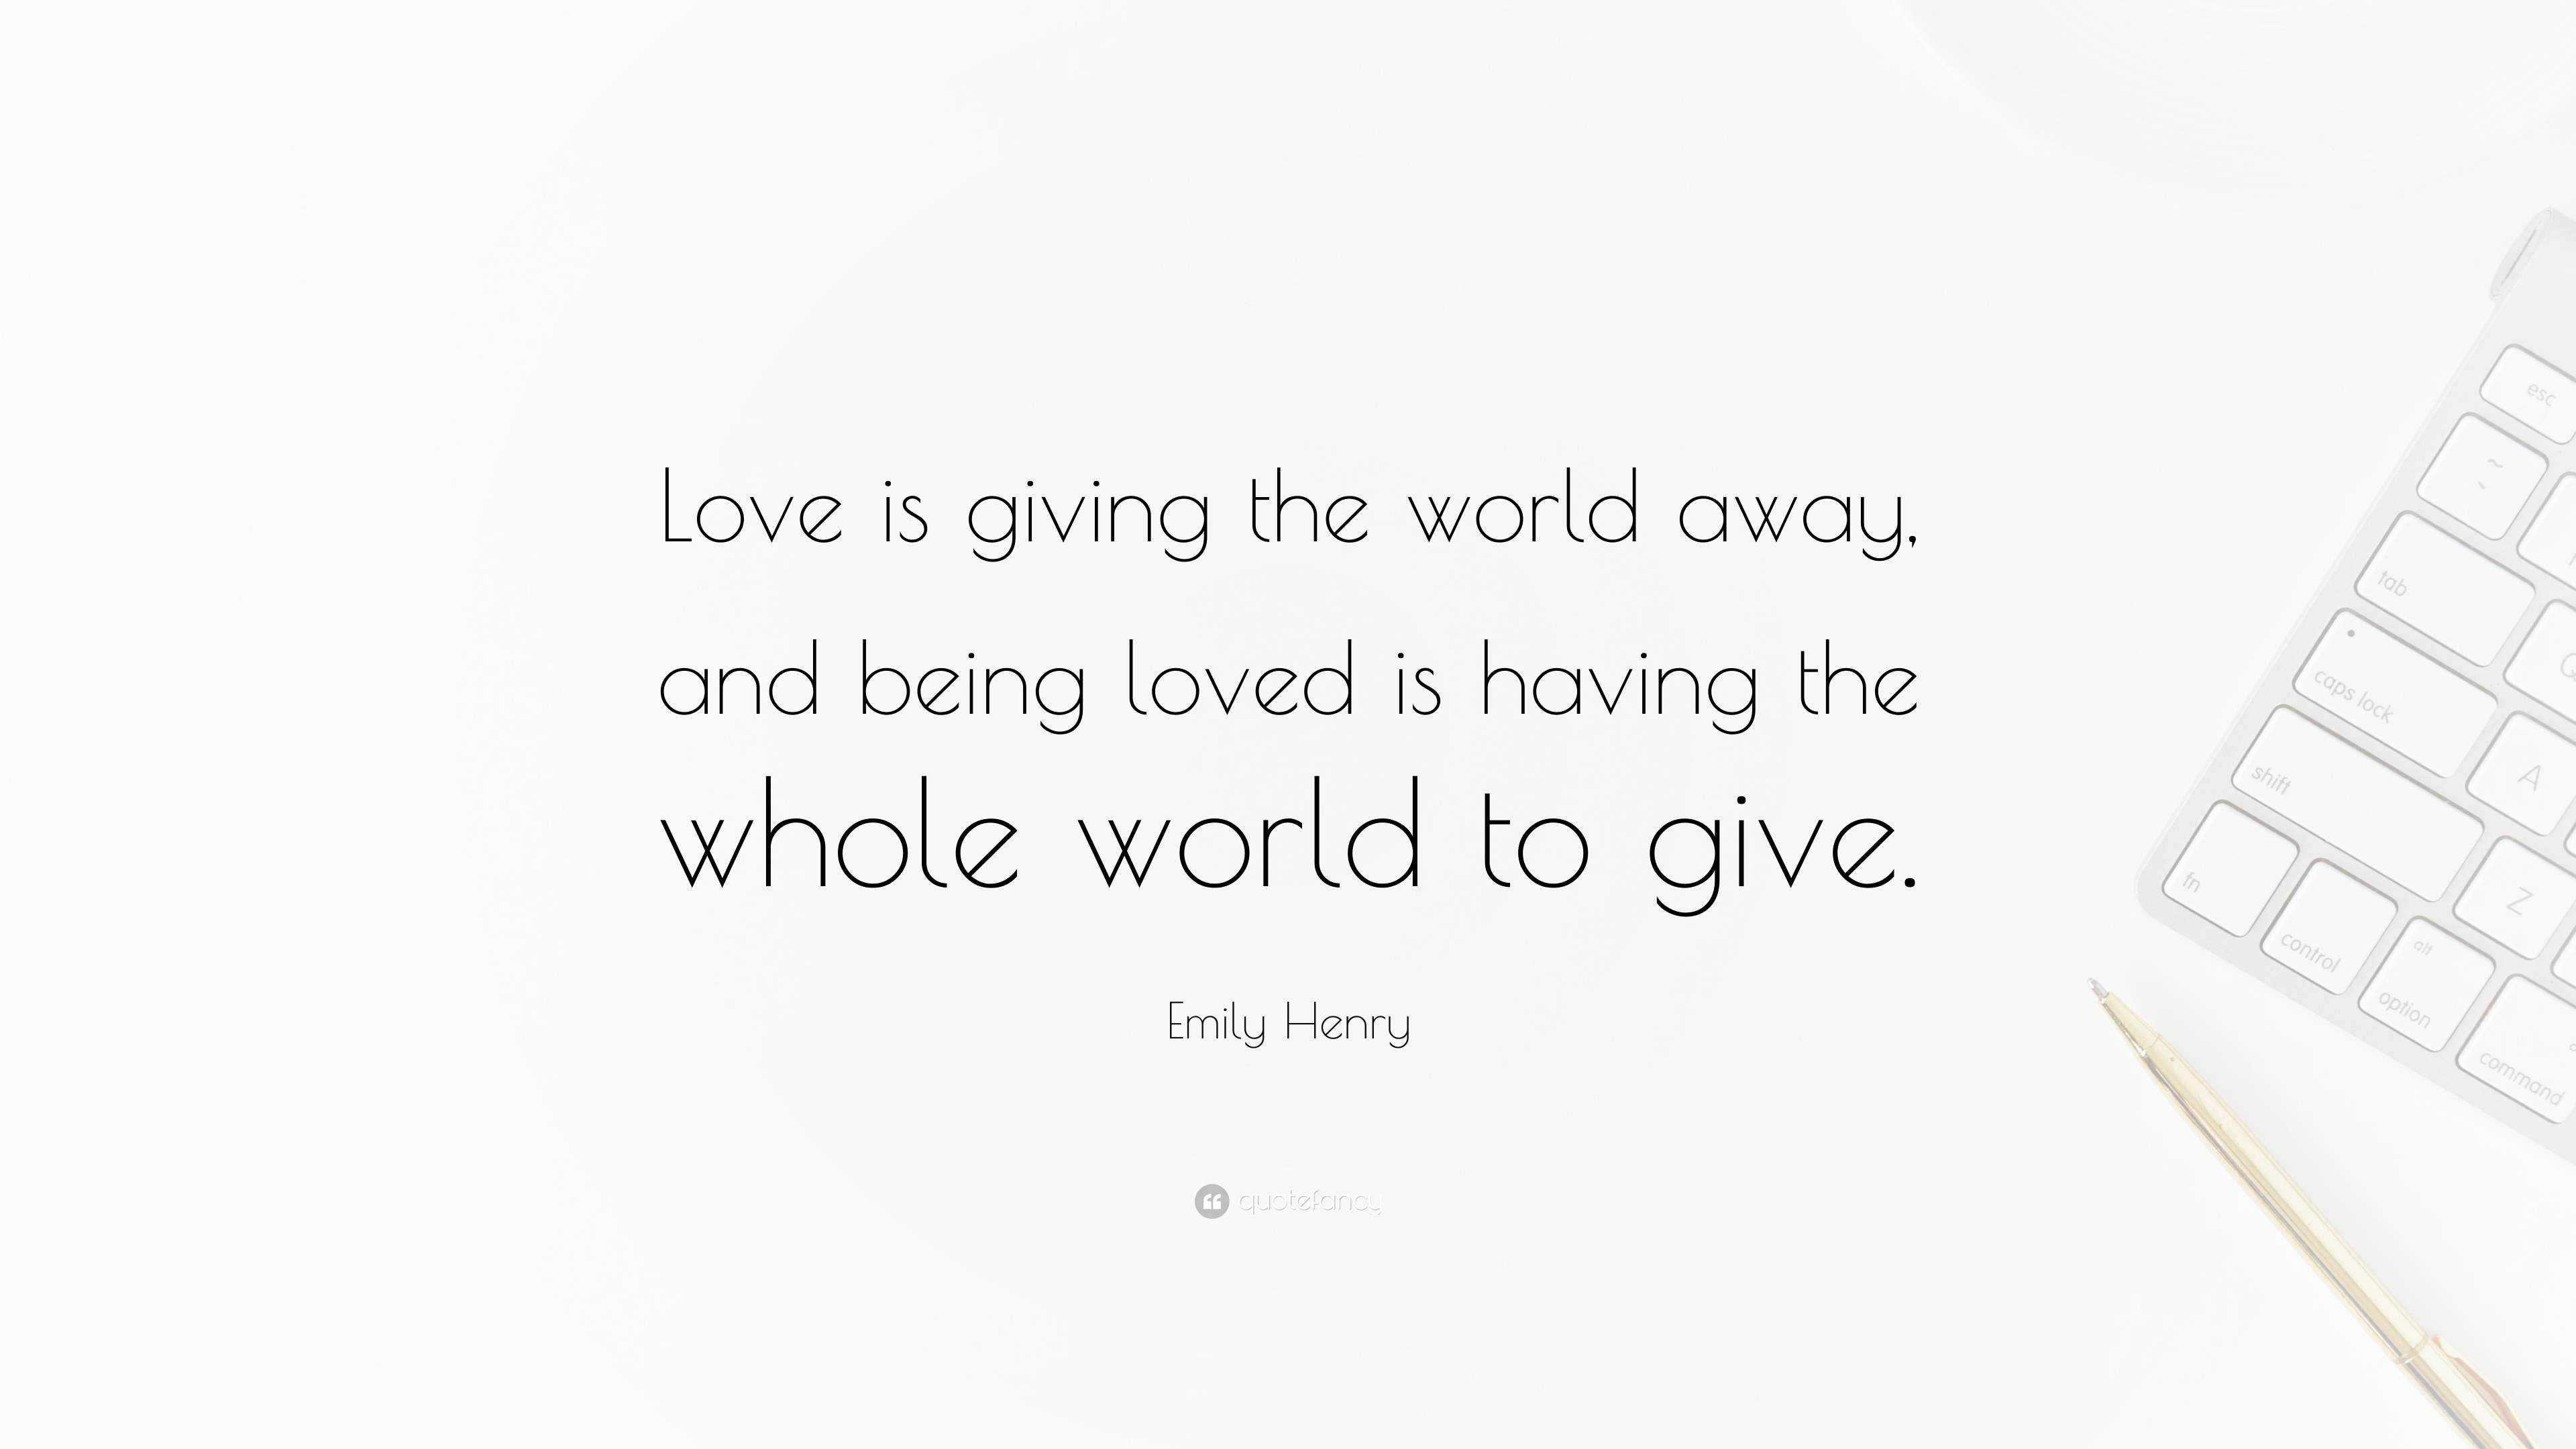 Emily Henry Quote: “Love is giving the world away, and being loved is